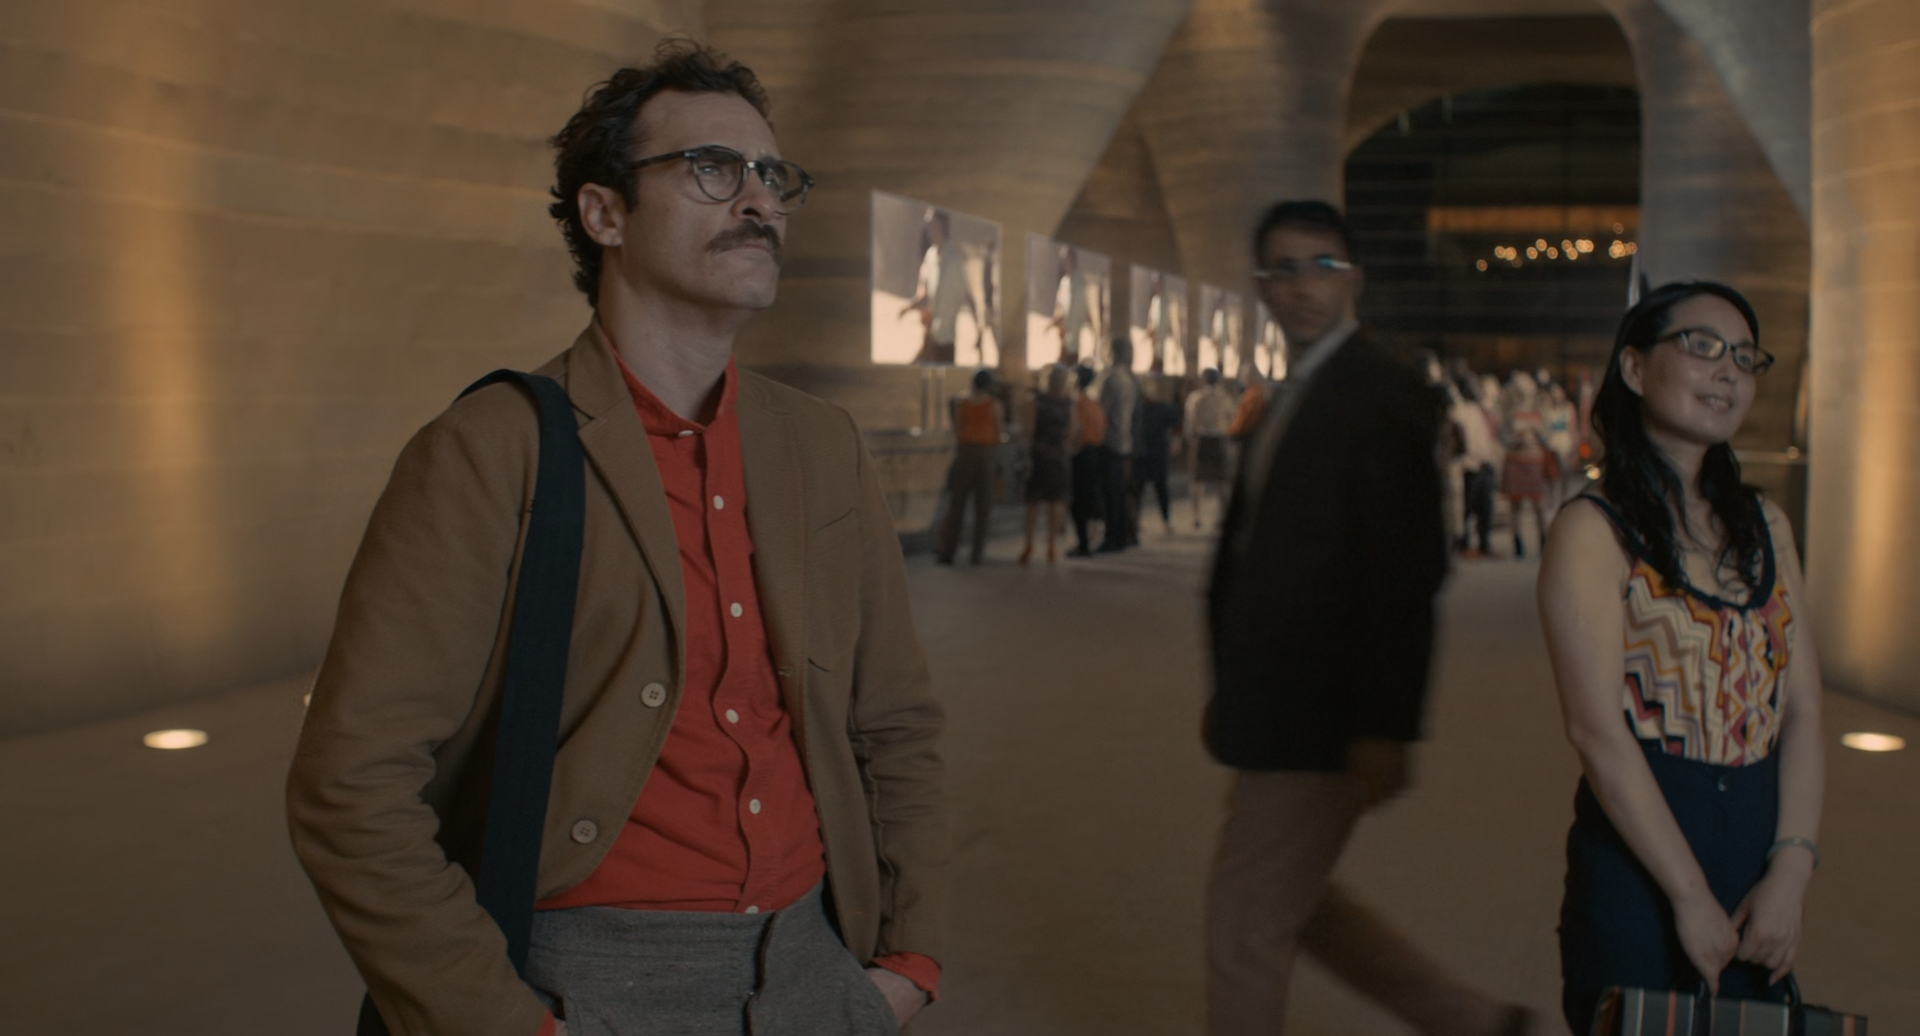 Her screenshot, Theo and extras gazing into an advertisement, wearing high-waisted pants